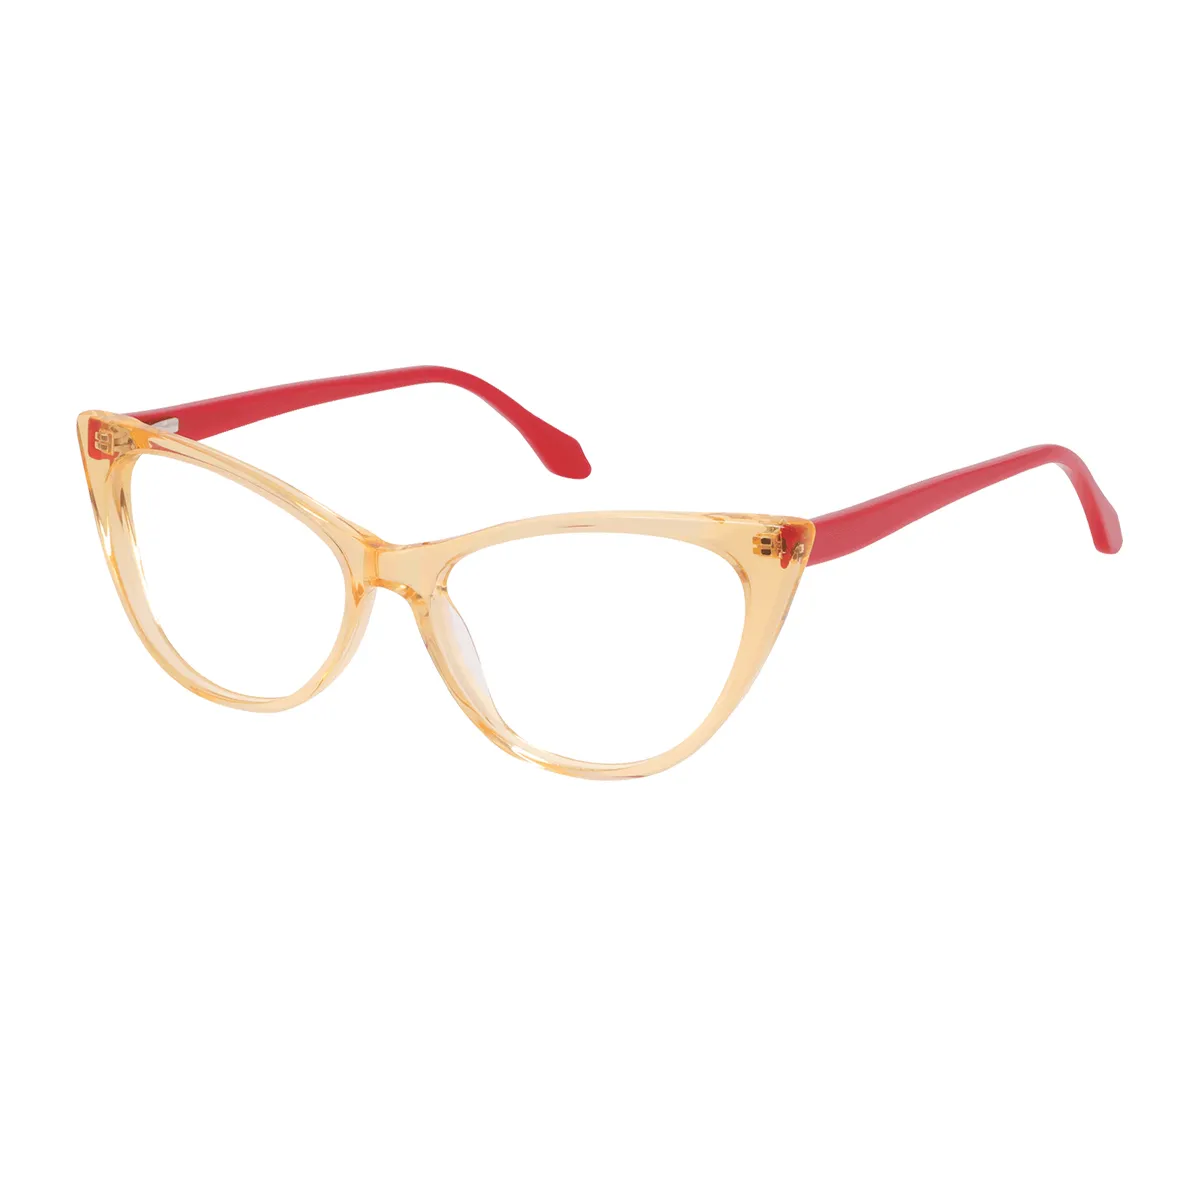 Angelica - Cat-eye Yellow-Red Glasses for Women